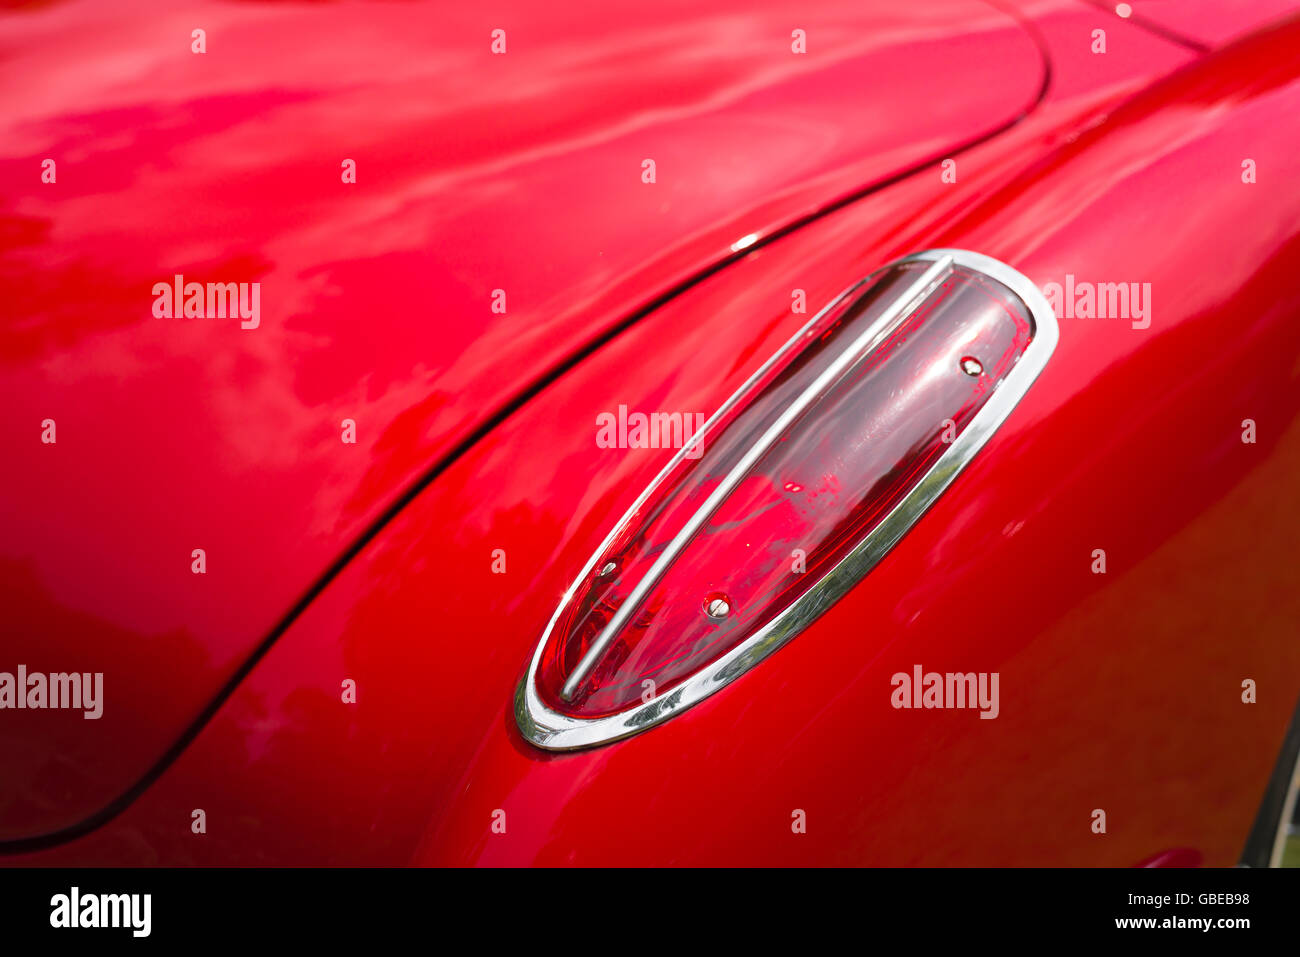 Detail of the rear wing and tail light of a 1958 Corvette Stingray Convertible car. Stock Photo